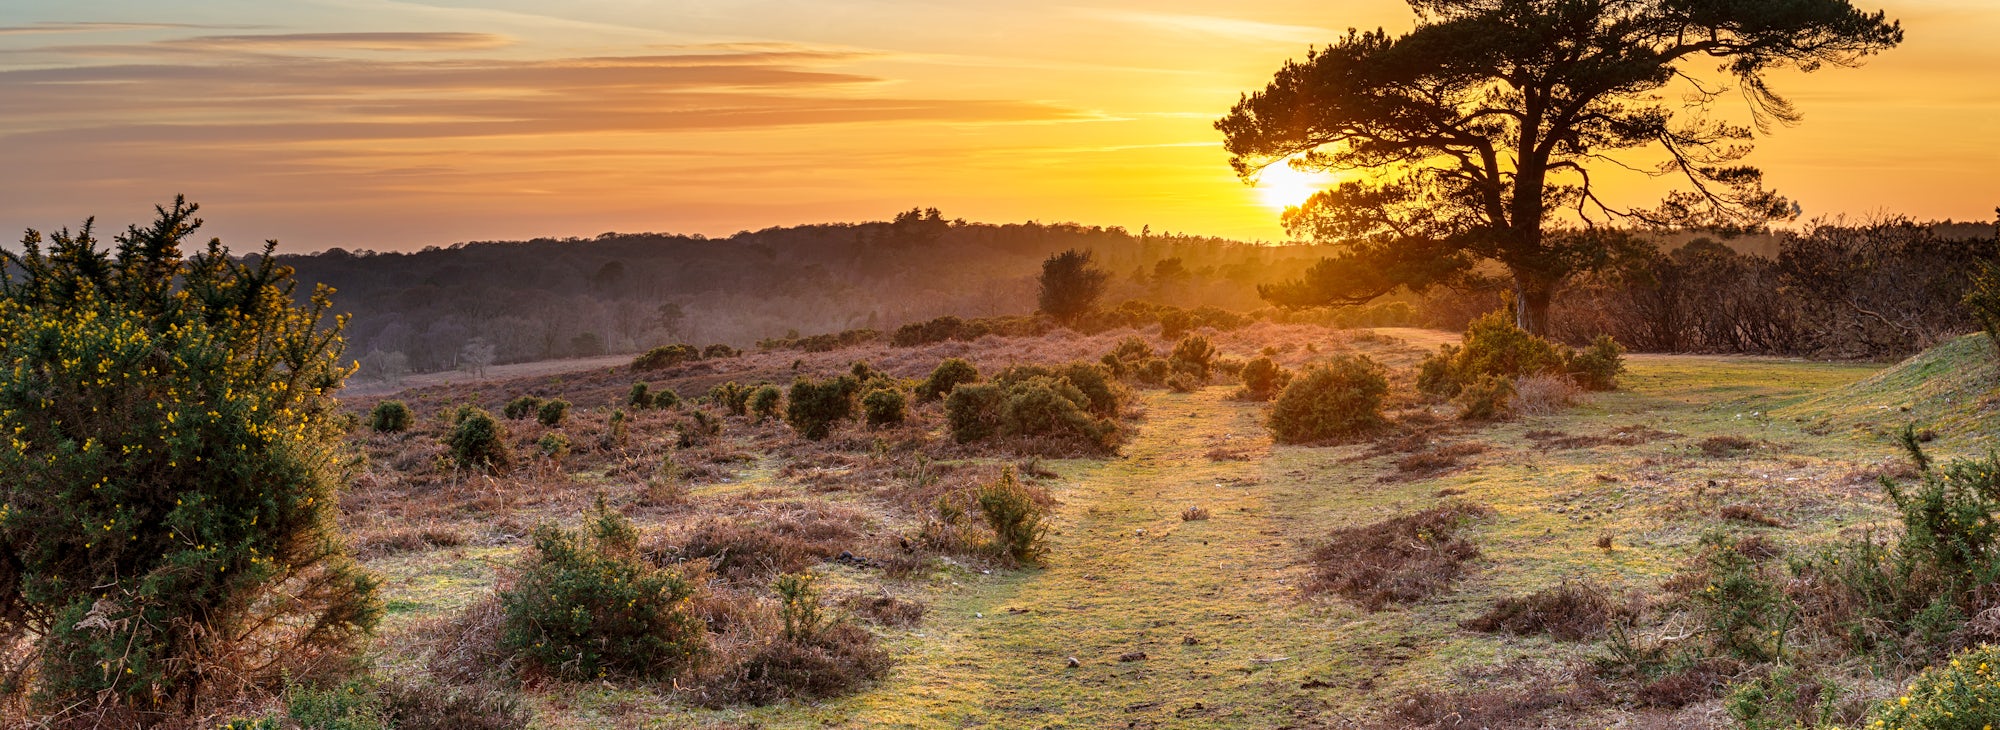 Dramatic sunset over the New Forest National Park at Bratley View near Lyndhurst in Hampshire